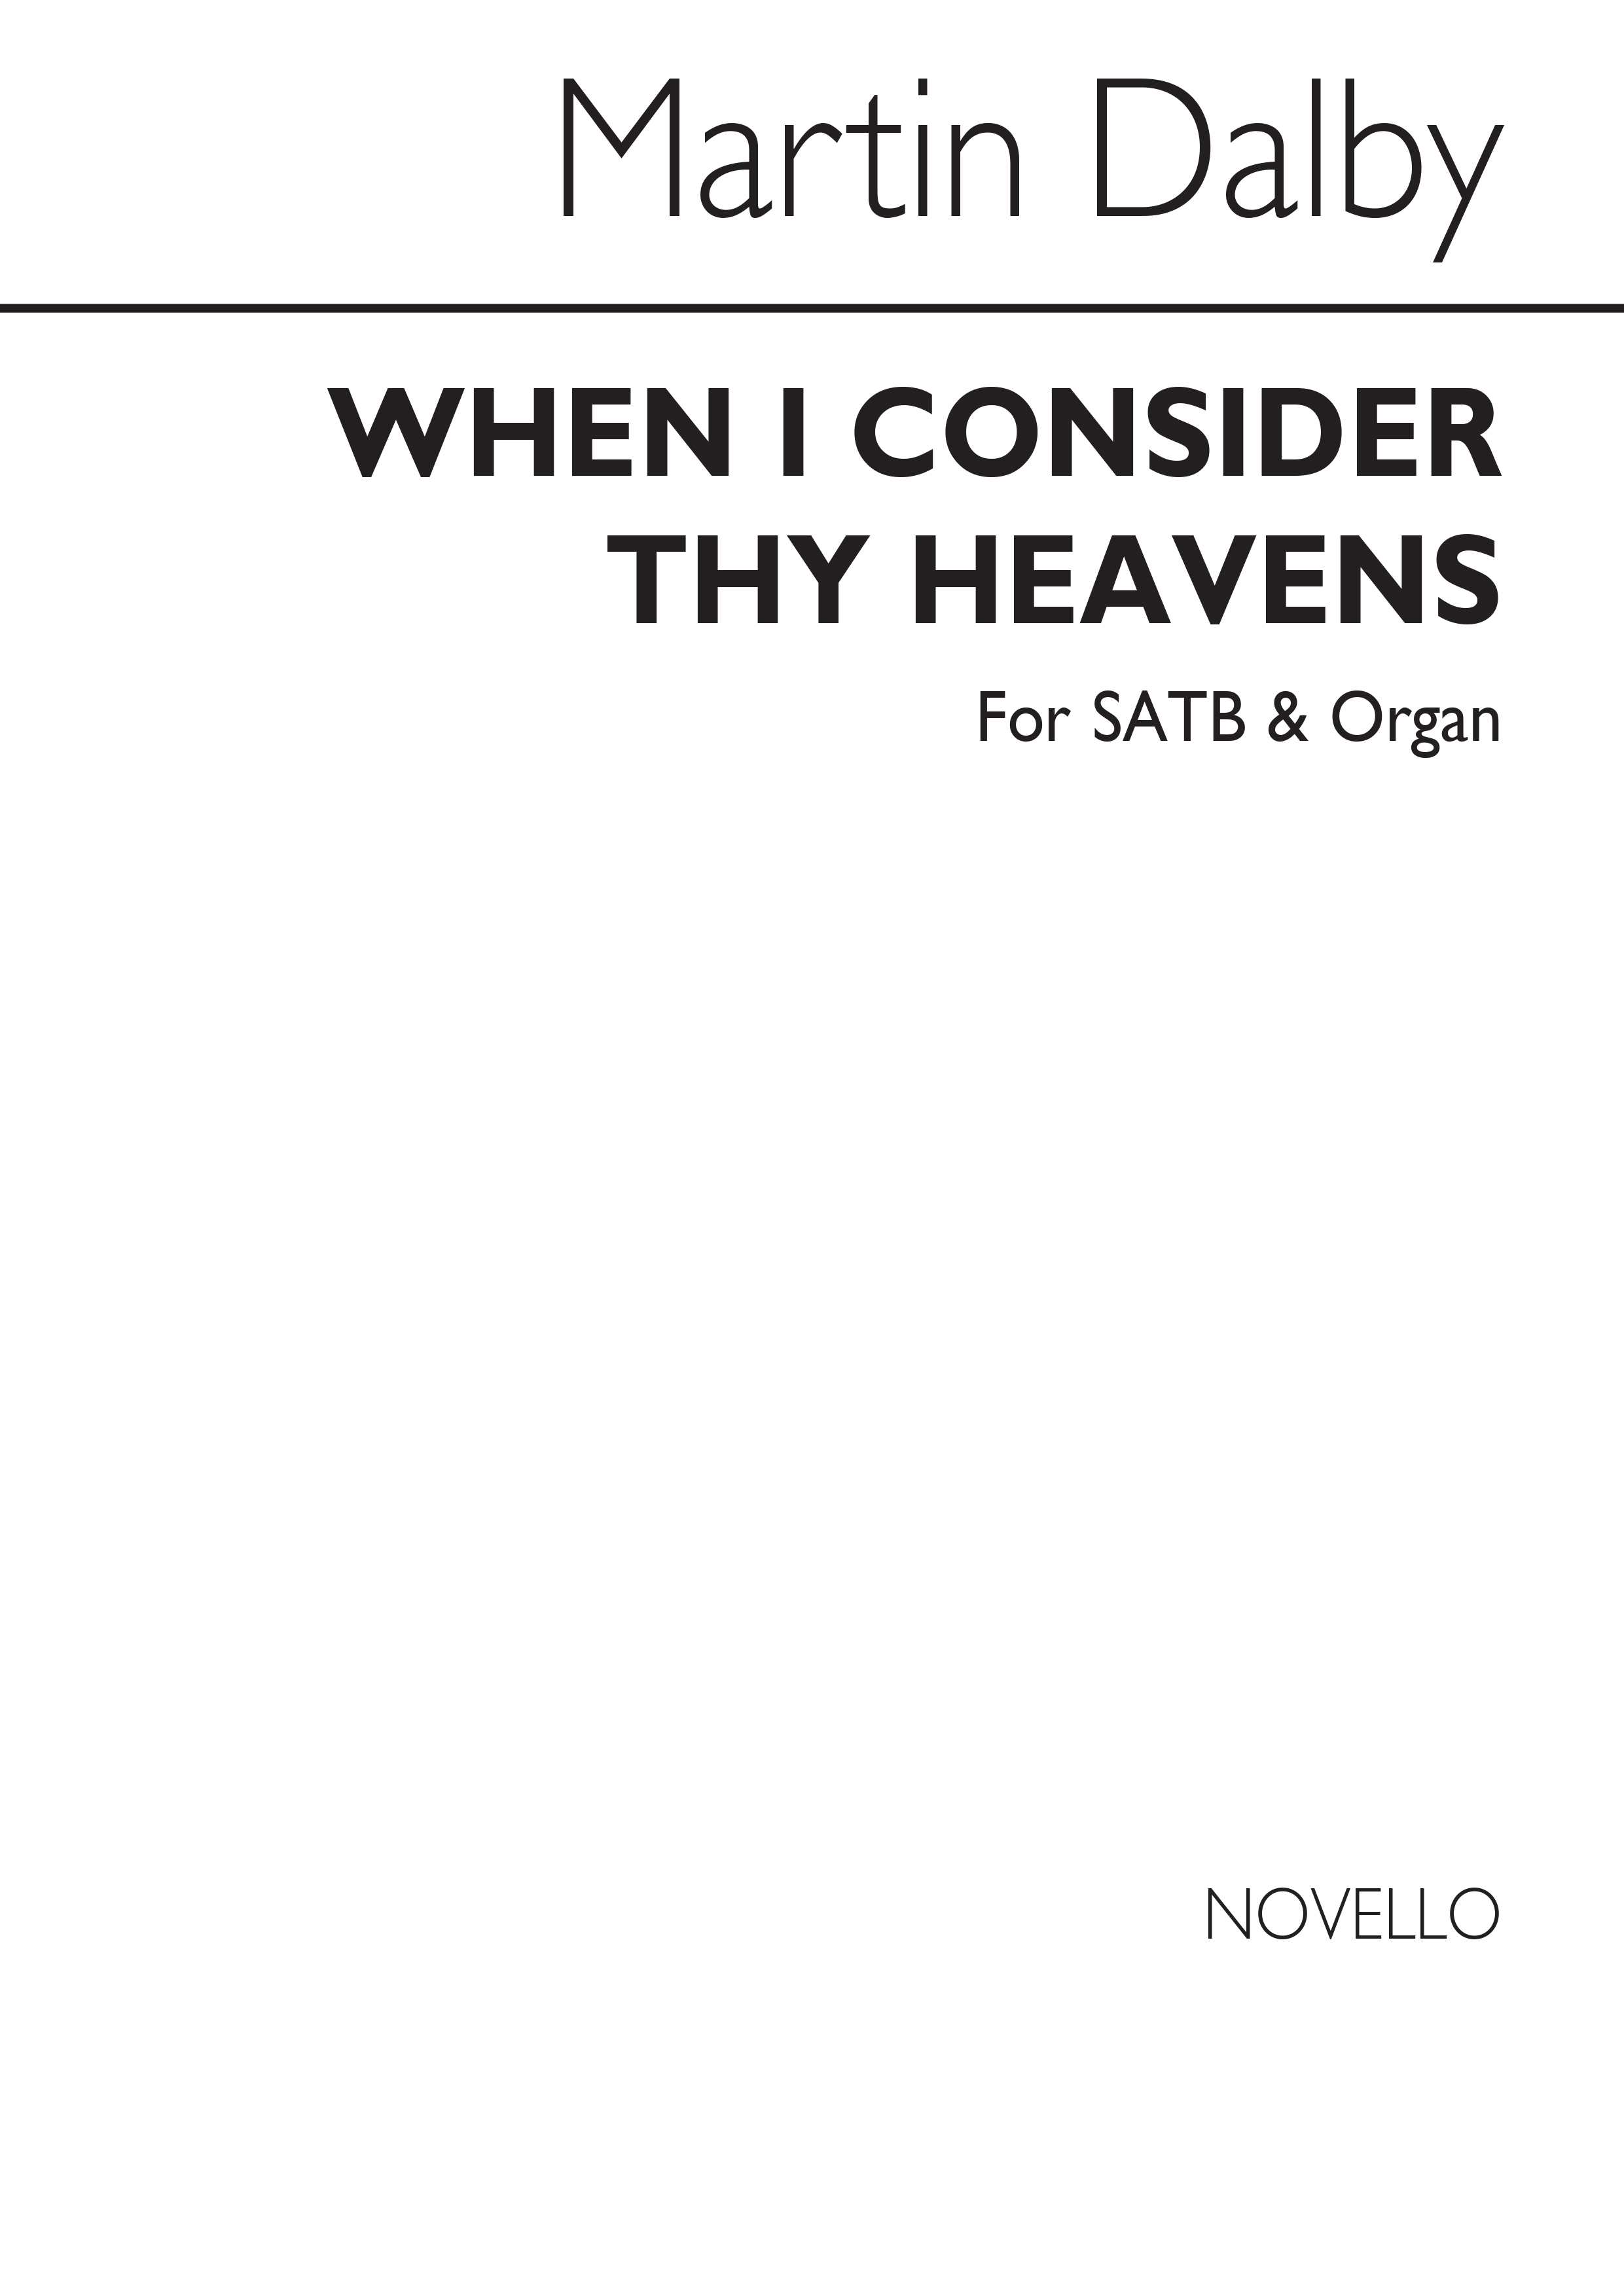 Dalby: When I Consider Thy Heavens for for SATB Chorus and Organ